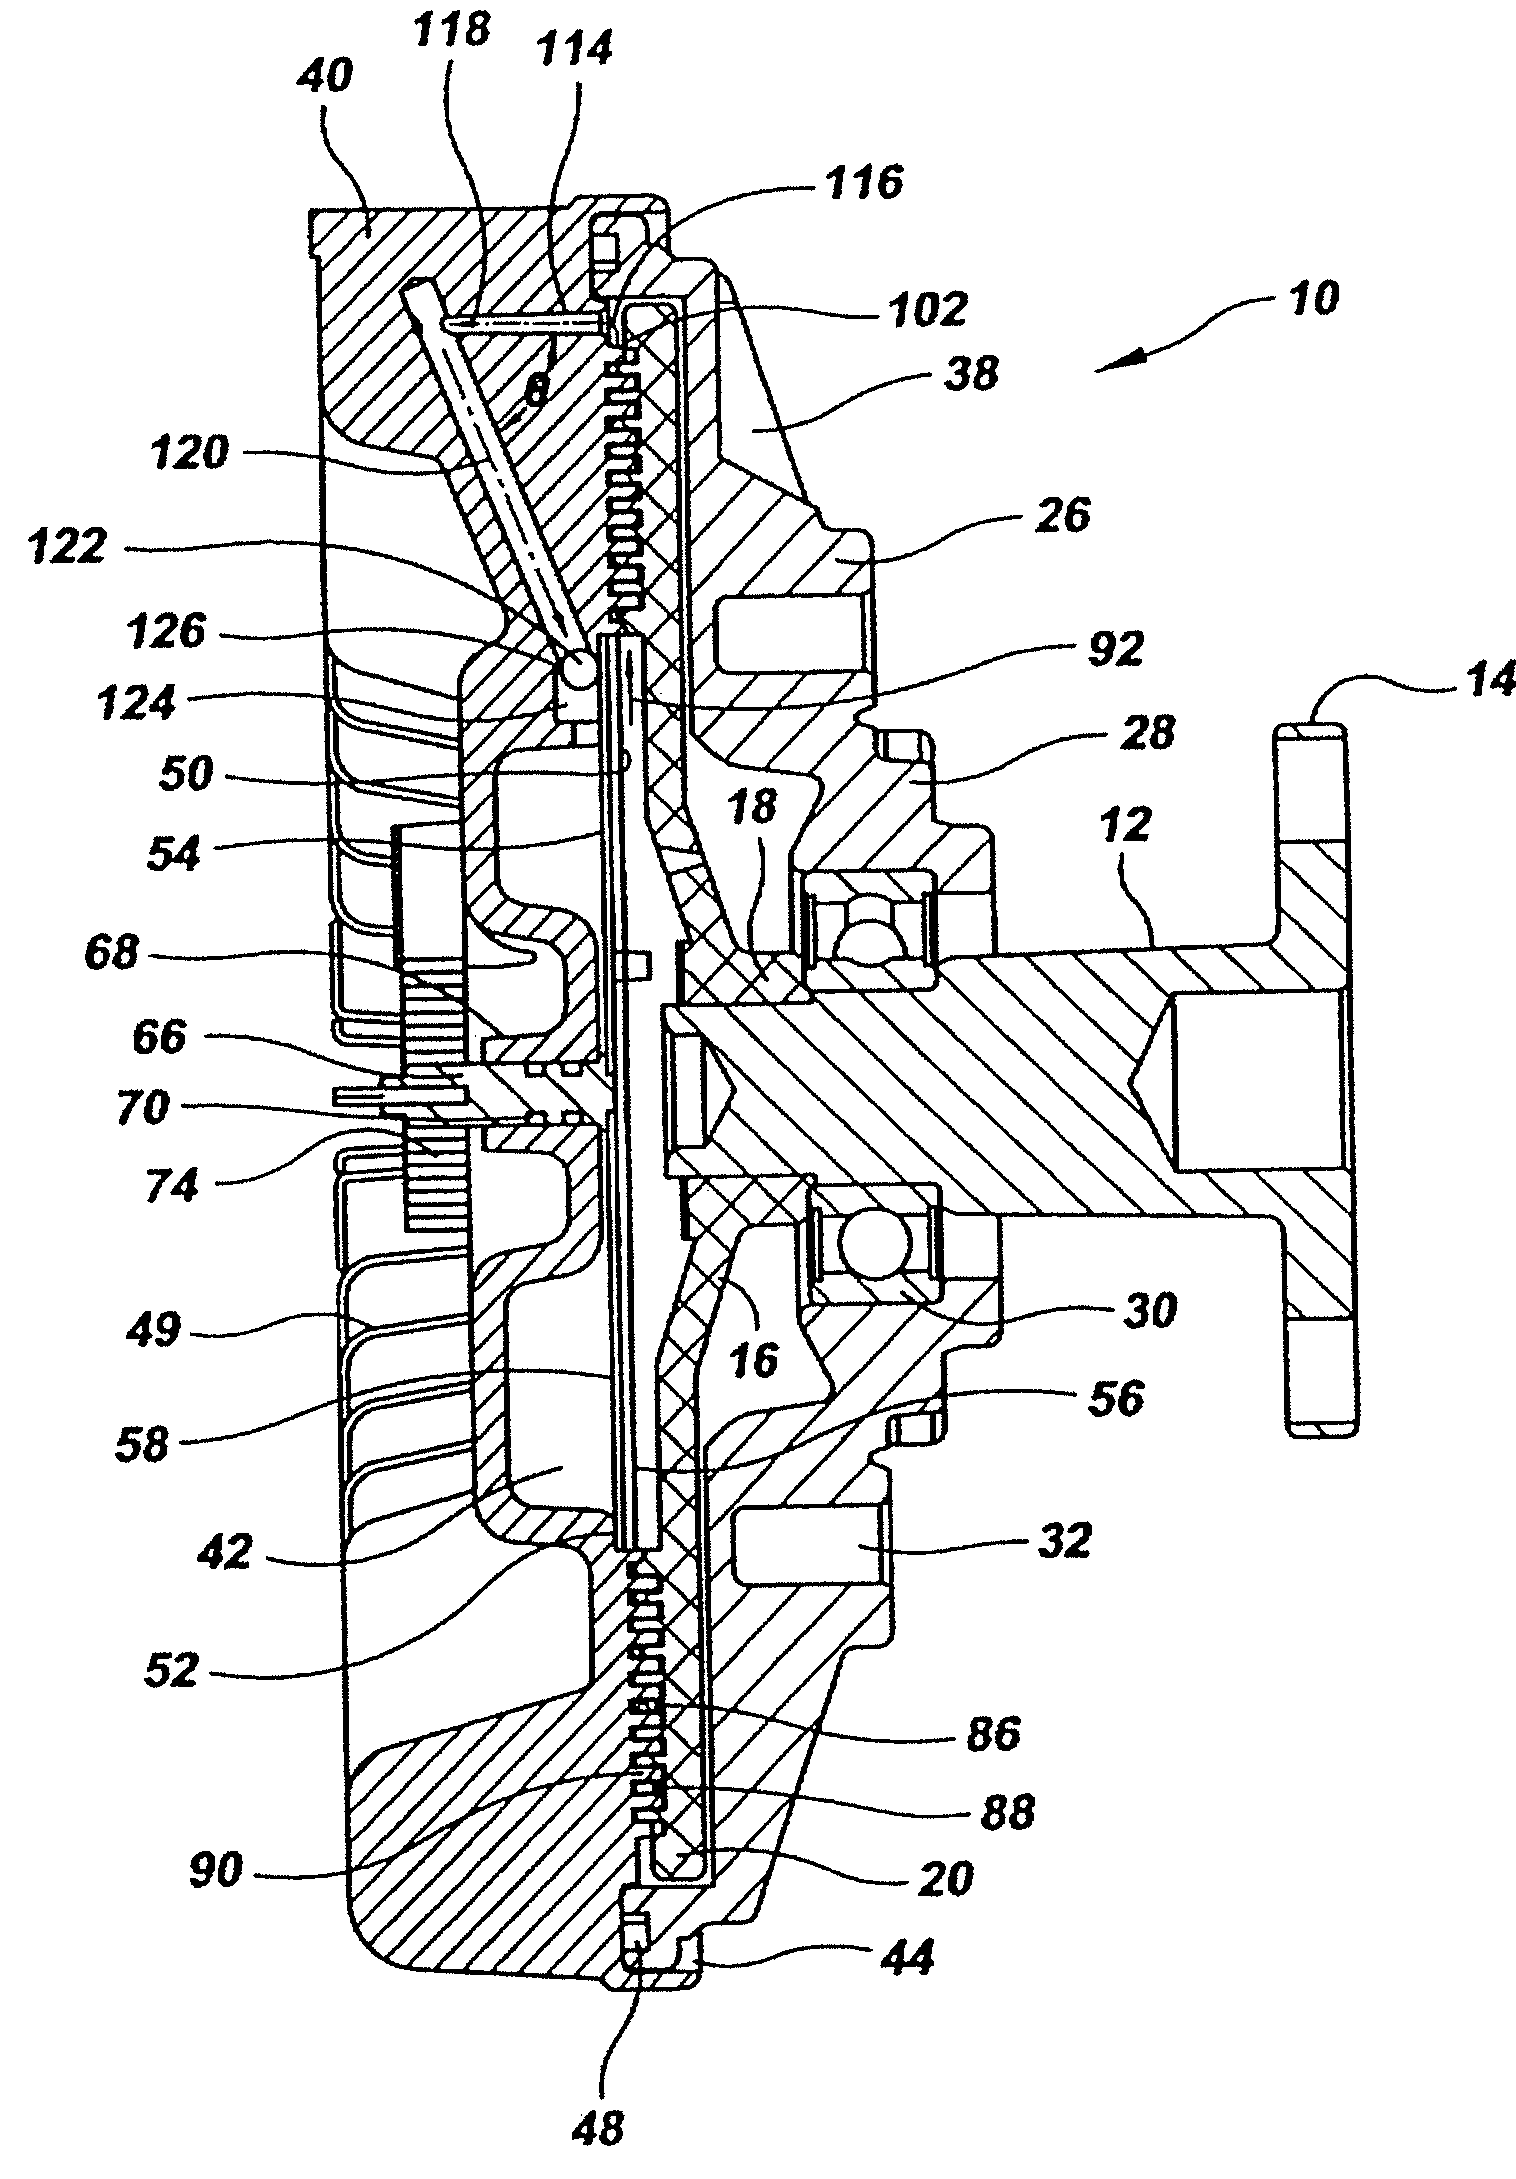 Inclusion of an anti-drain valve in viscous fan clutches